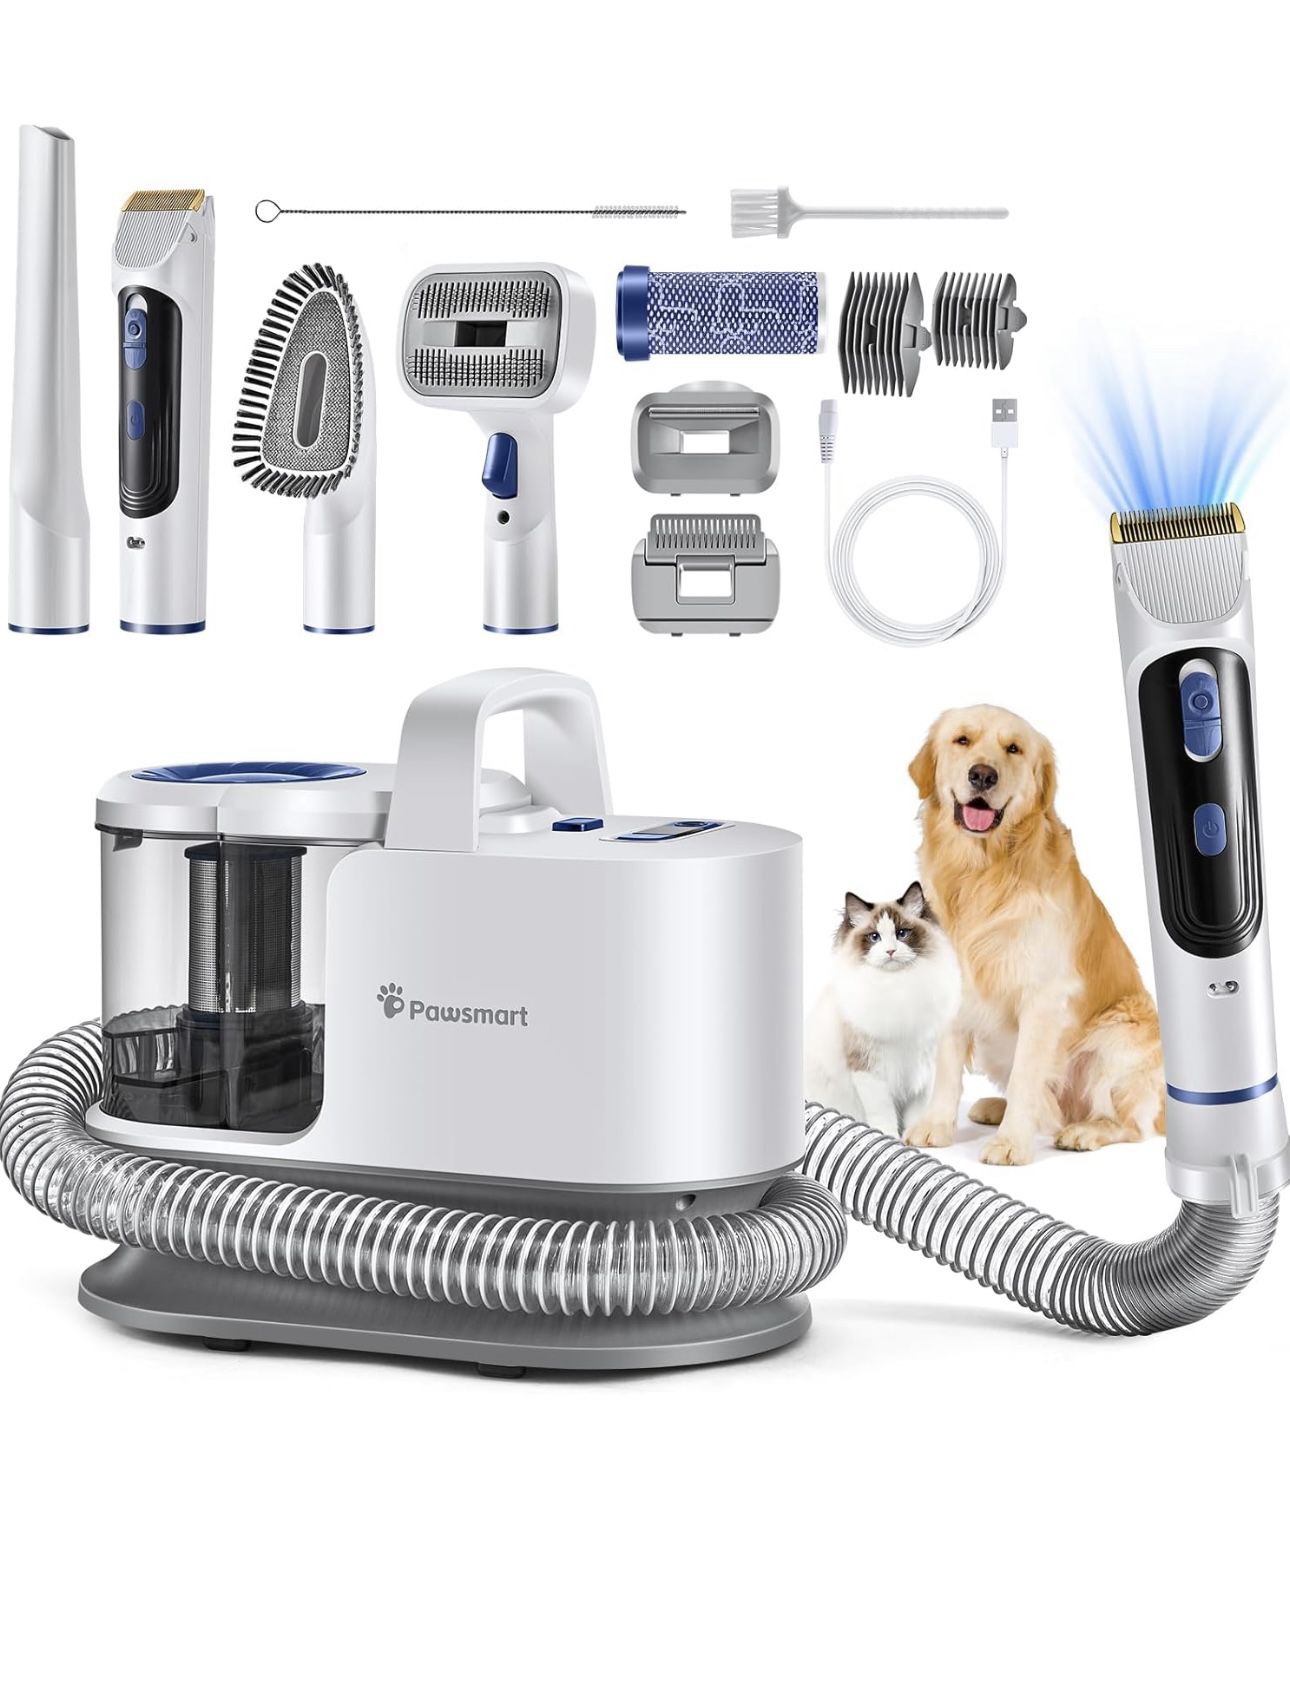 Pet Grooming Kit,Dog Vacuum for Shedding Grooming with 6 Pet Groomer Tools,Low Noise Stress-Free Dogs Hair Brush Vacuum Cleaner Dog Clippers for Cats 